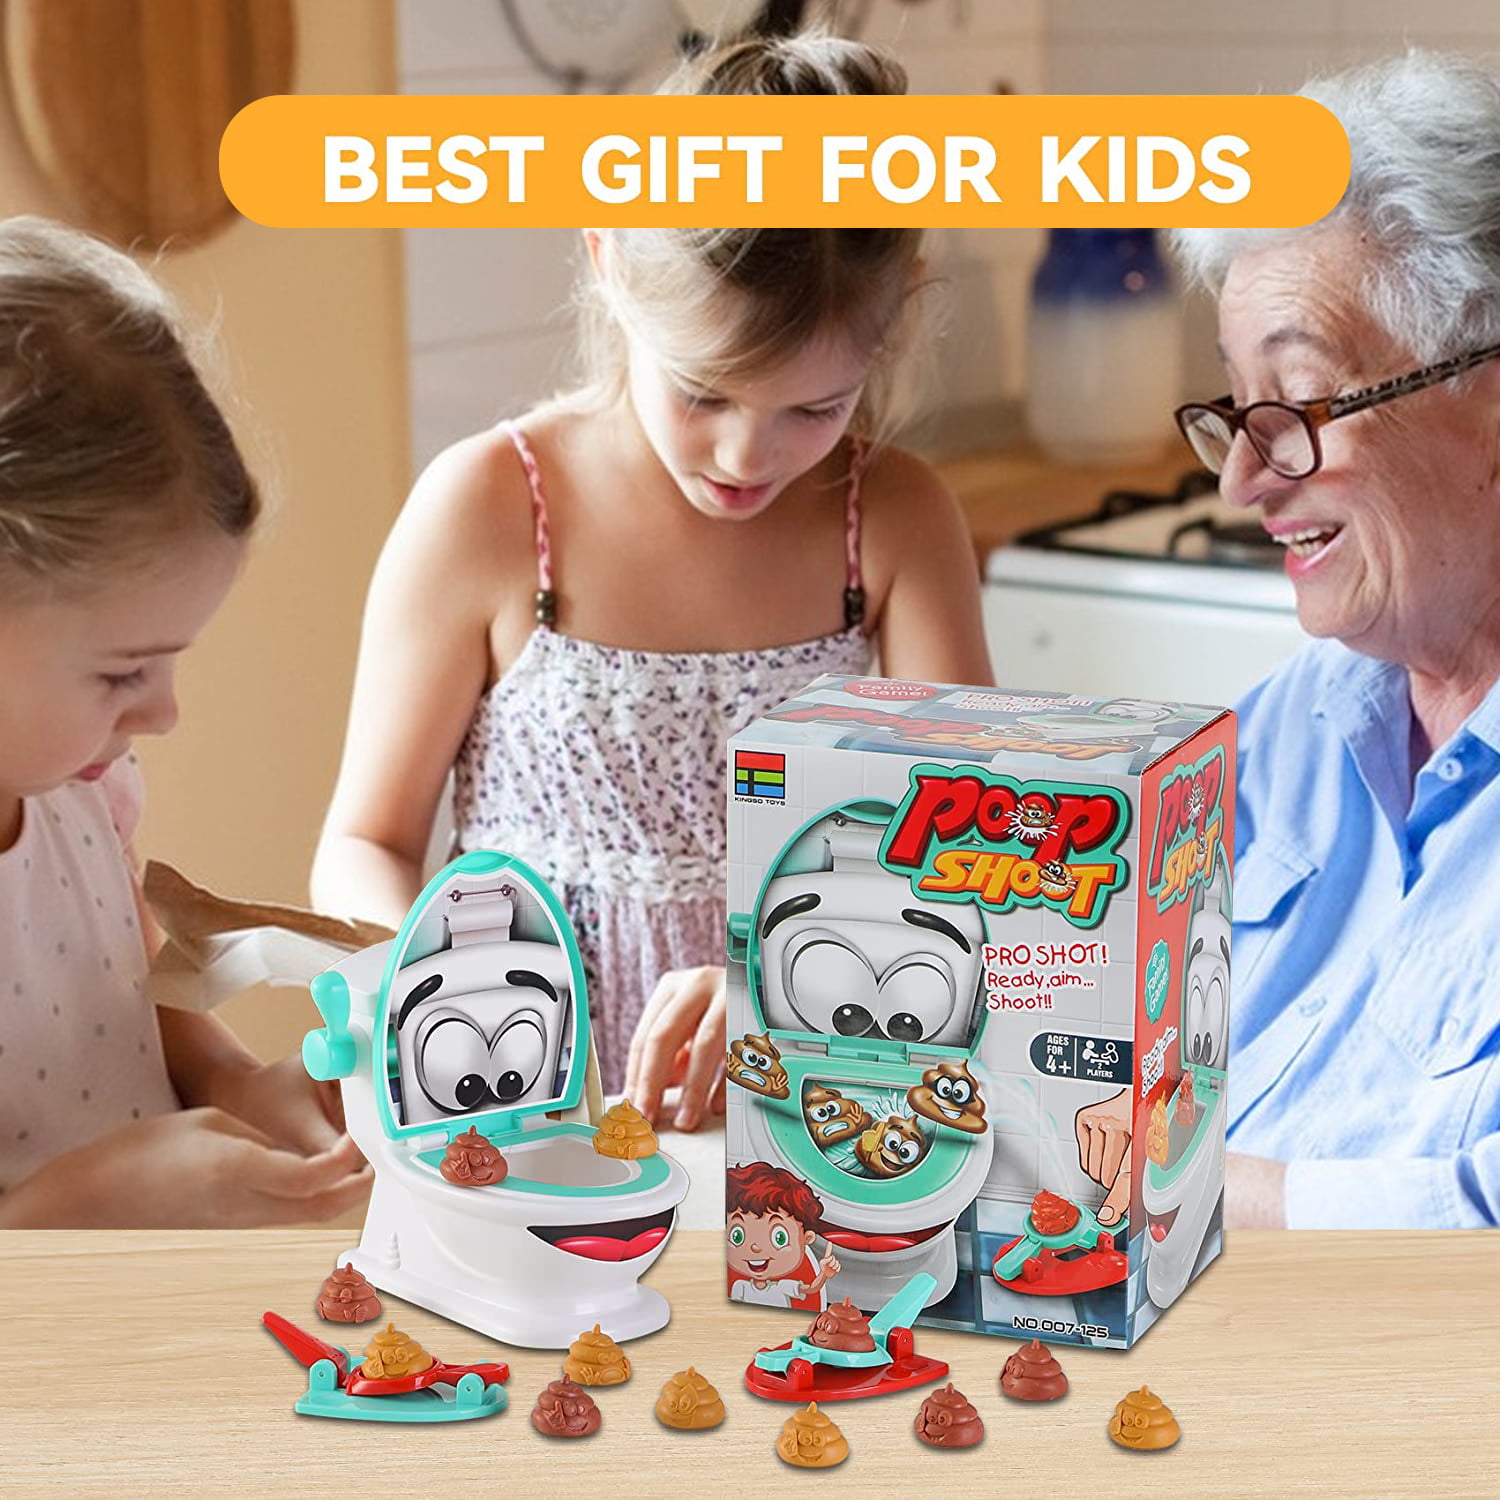 Creative Family Game Includes One Toilet,Two Launchers and 12 Soft Toy  Poops,Gift for Kids 4 5 6 7 8 Year Old